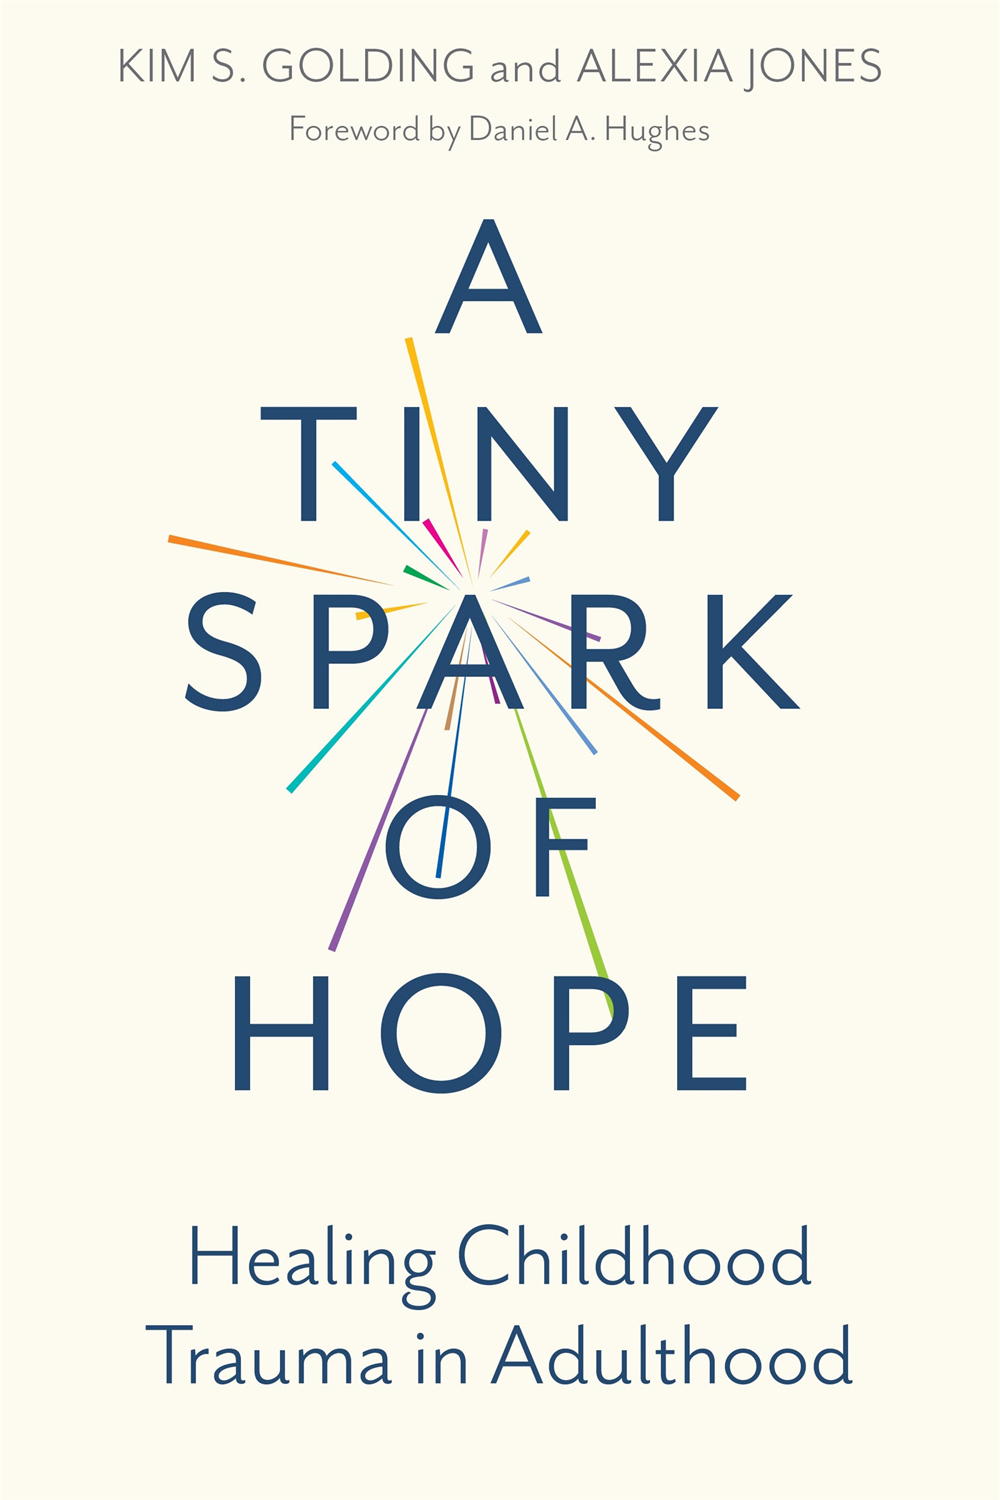 A TINY SPARK OF HOPE Healing Childhood Trauma in Adulthood KIM S GOLDING - photo 1